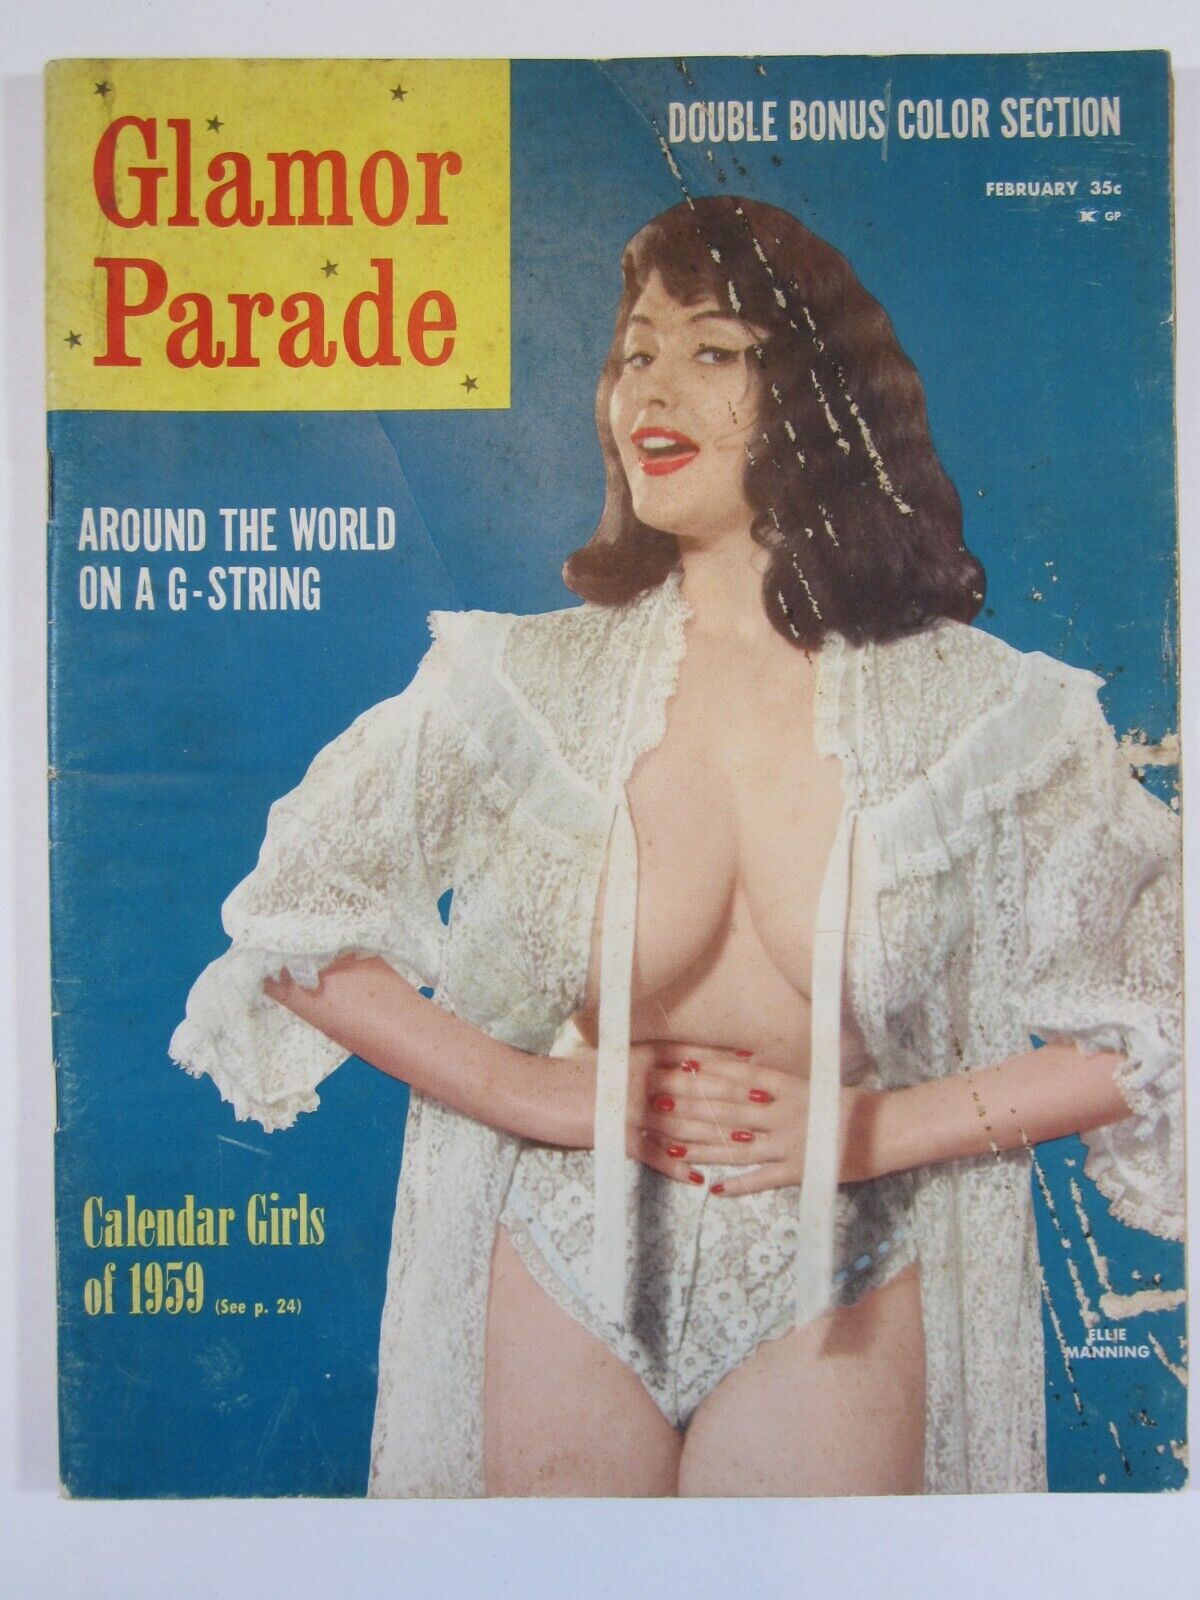 Glamor Parade Vol. 2 #5, February, 1959  VG   Amazing Betty Page Centerfold